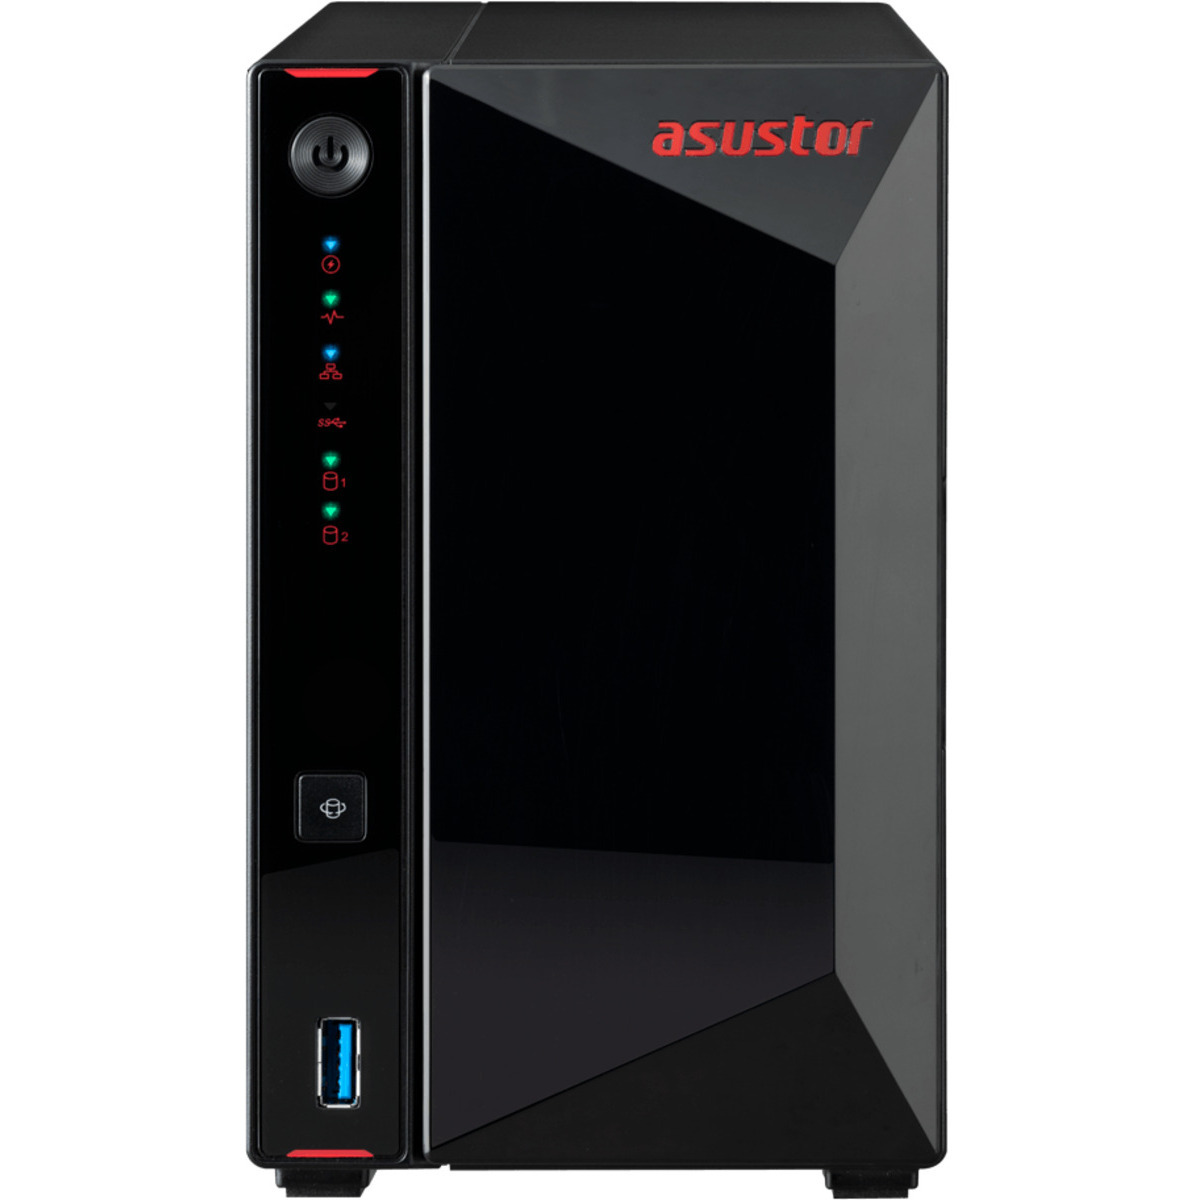 buy $1028 ASUSTOR AS5202T Nimbustor 24tb Desktop NAS - Network Attached Storage Device 2x12000gb Western Digital Red Pro WD121KFBX 3.5 7200rpm SATA 6Gb/s HDD NAS Class Drives Installed - Burn-In Tested - FREE RAM UPGRADE - nas headquarters buy network attached storage server device das new raid-5 free shipping usa AS5202T Nimbustor